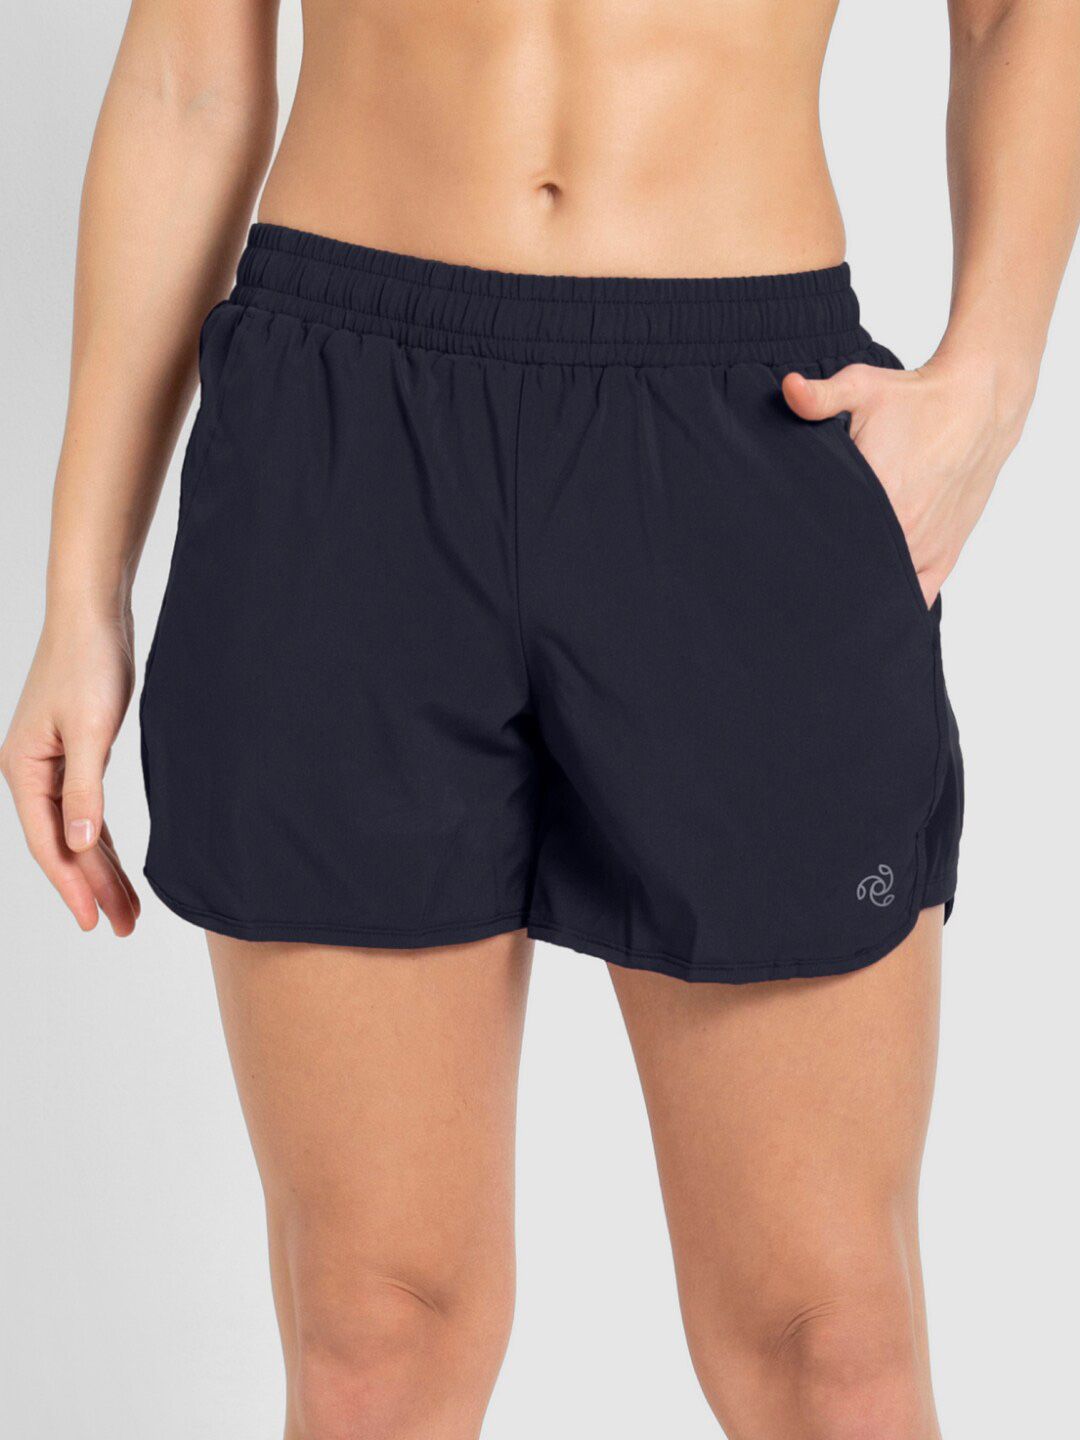 Jockey Women Blue Solid Lounge Shorts Price in India